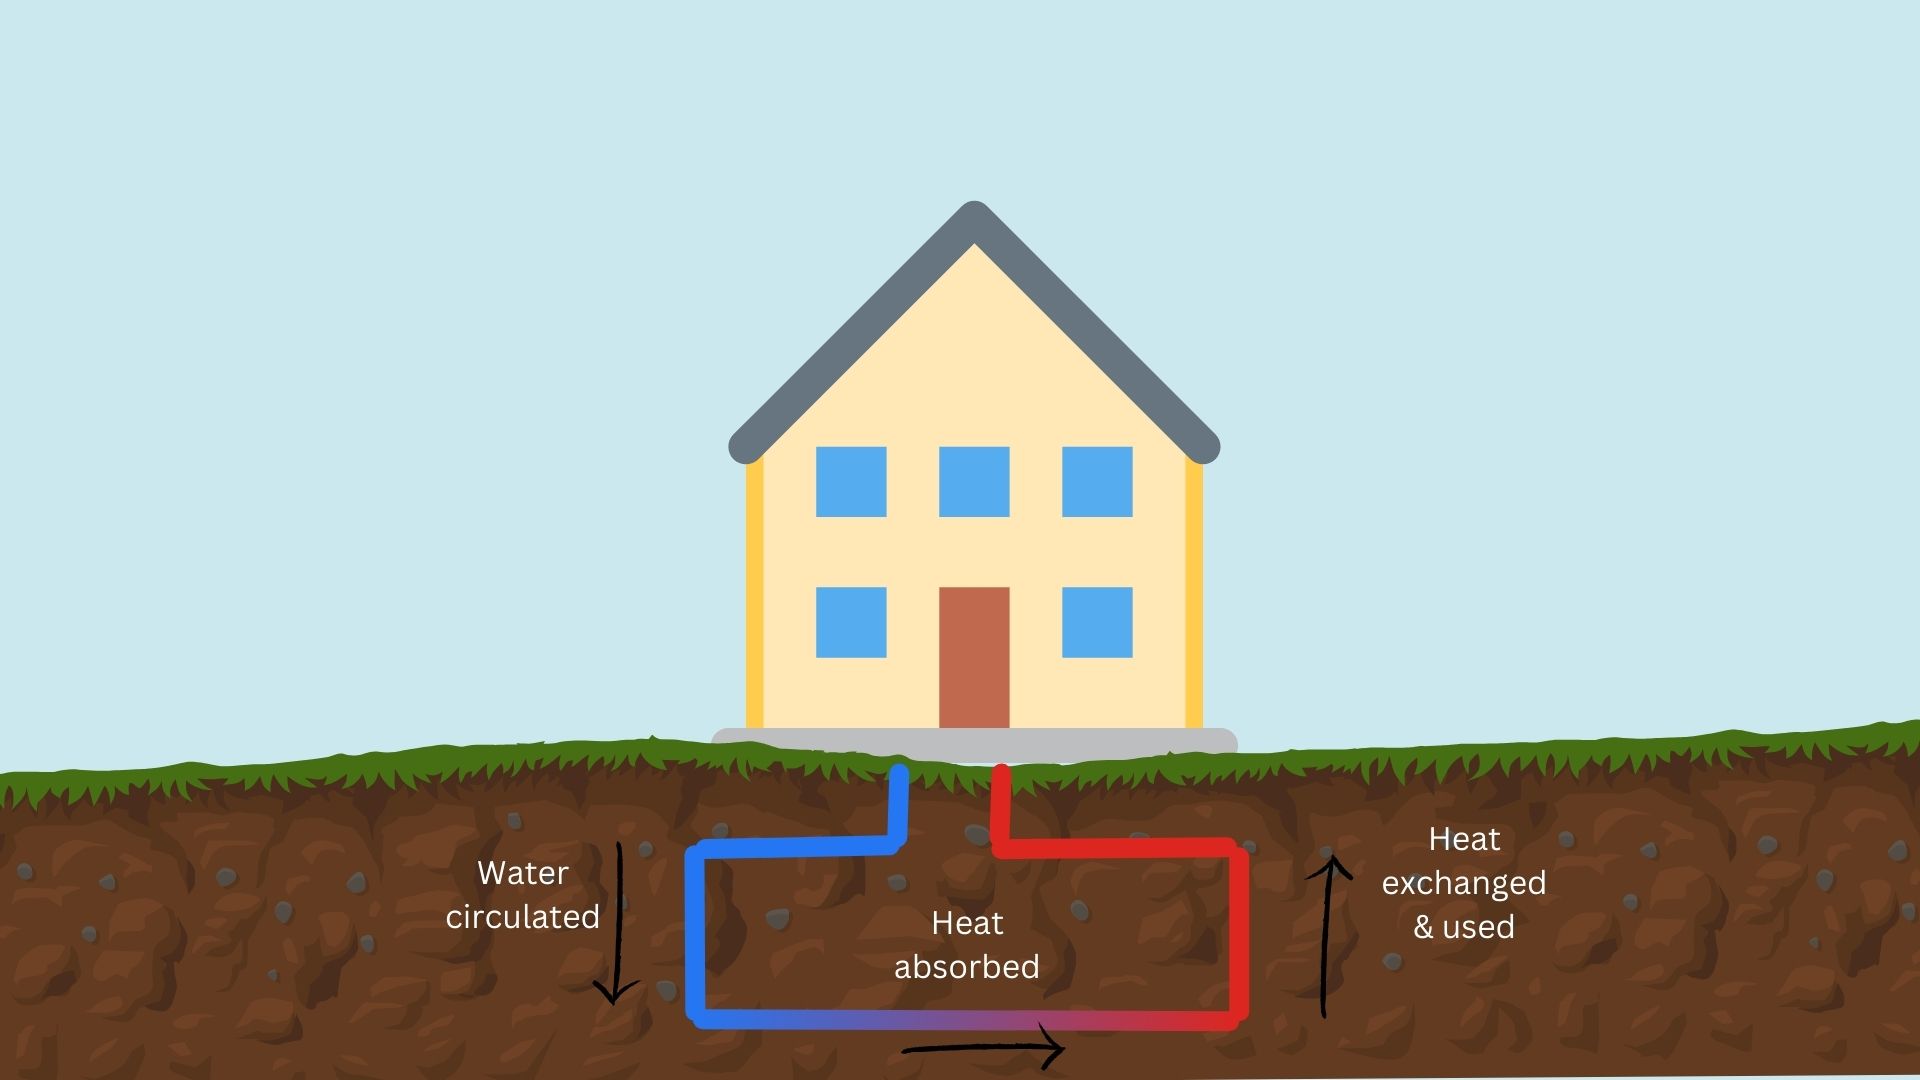 An illustration of a house with a ground source heat pump that helps save money.